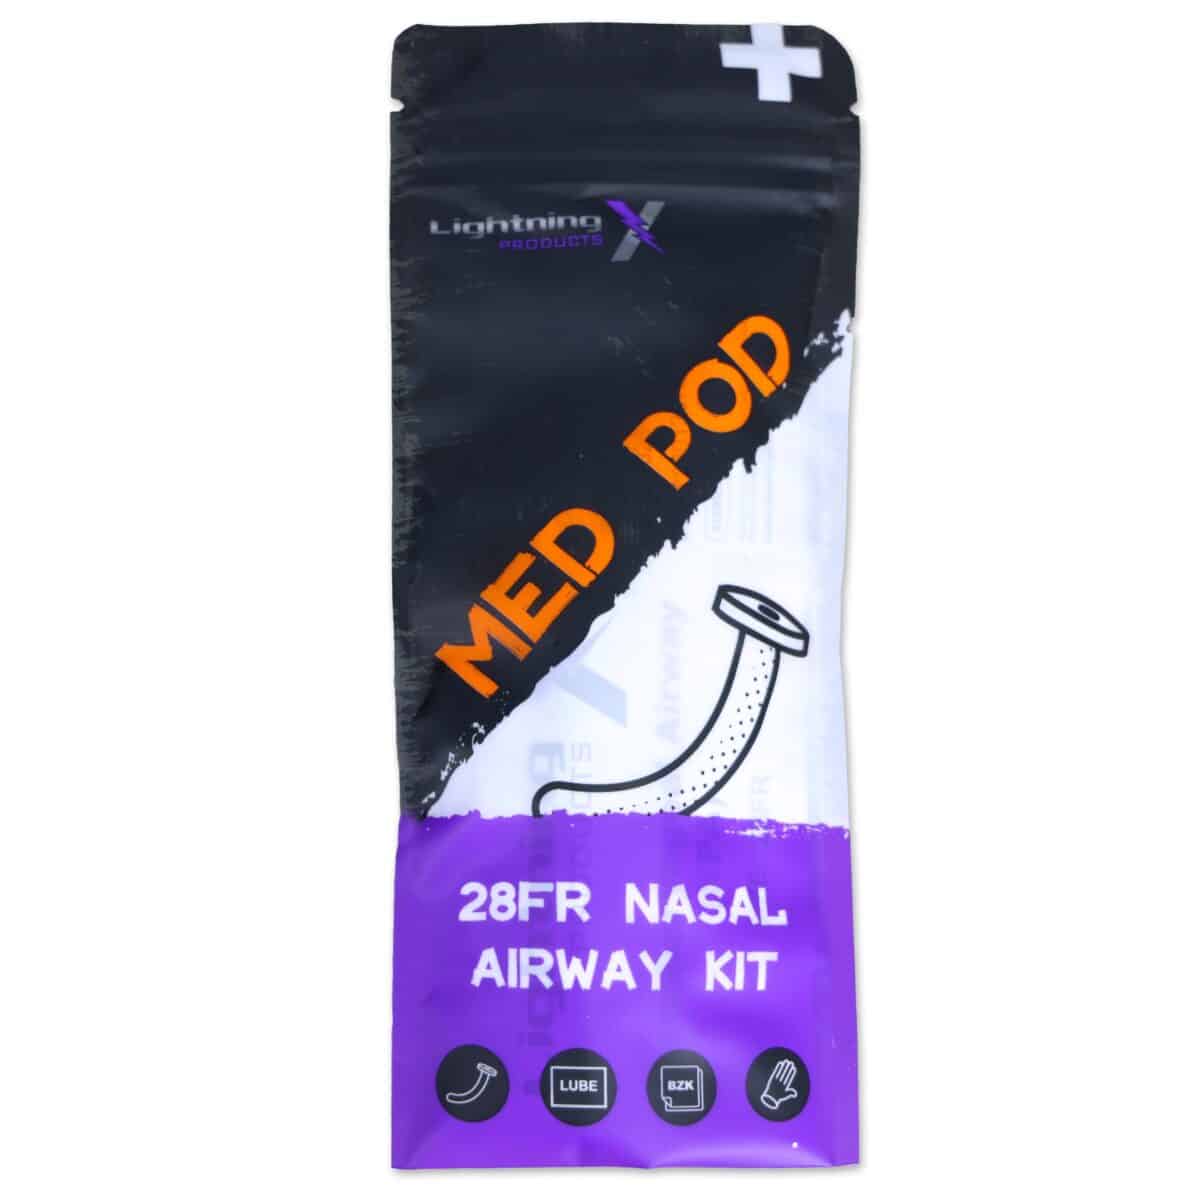 lightning x nasopharyngeal nasal airway npa kit size 28fr trumpet includes nitrile exam gloves, lubricating jelly packet and bzk cleansing wipe, in resealable zippered bed pod bag, great for ifak first aid kits